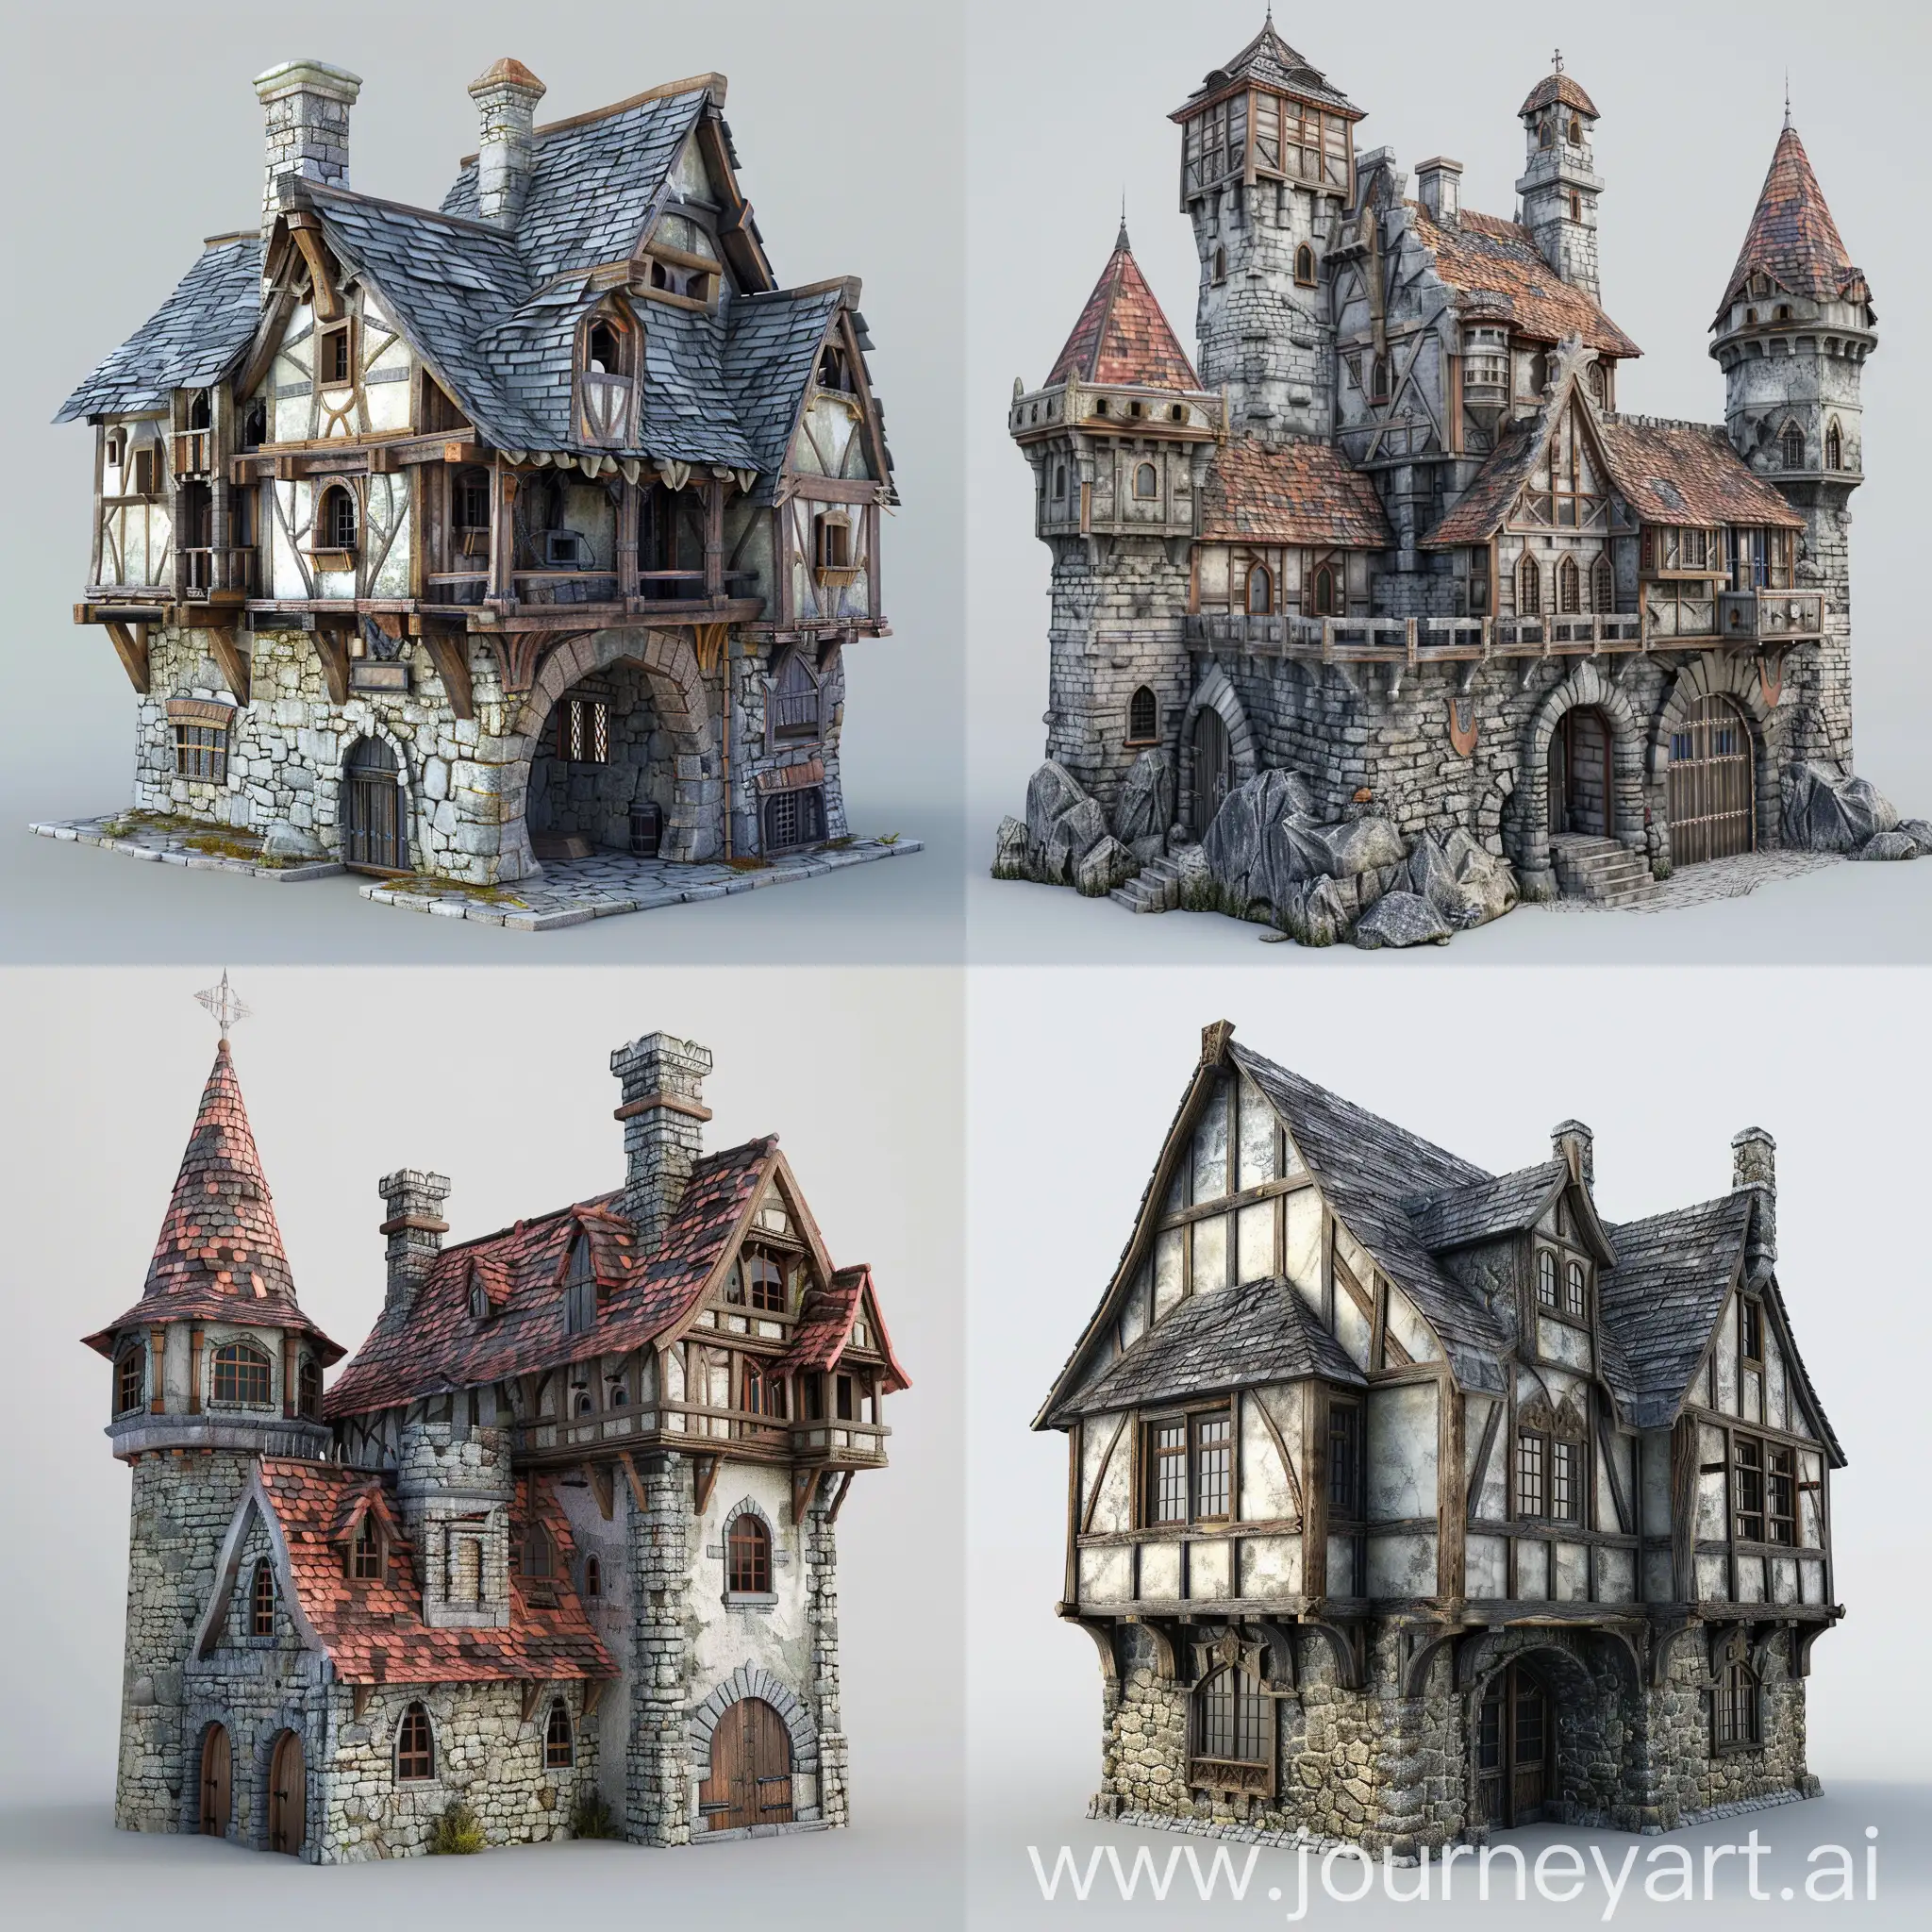 Medieval-3D-Stylized-Architecture-Building-in-11-Aspect-Ratio